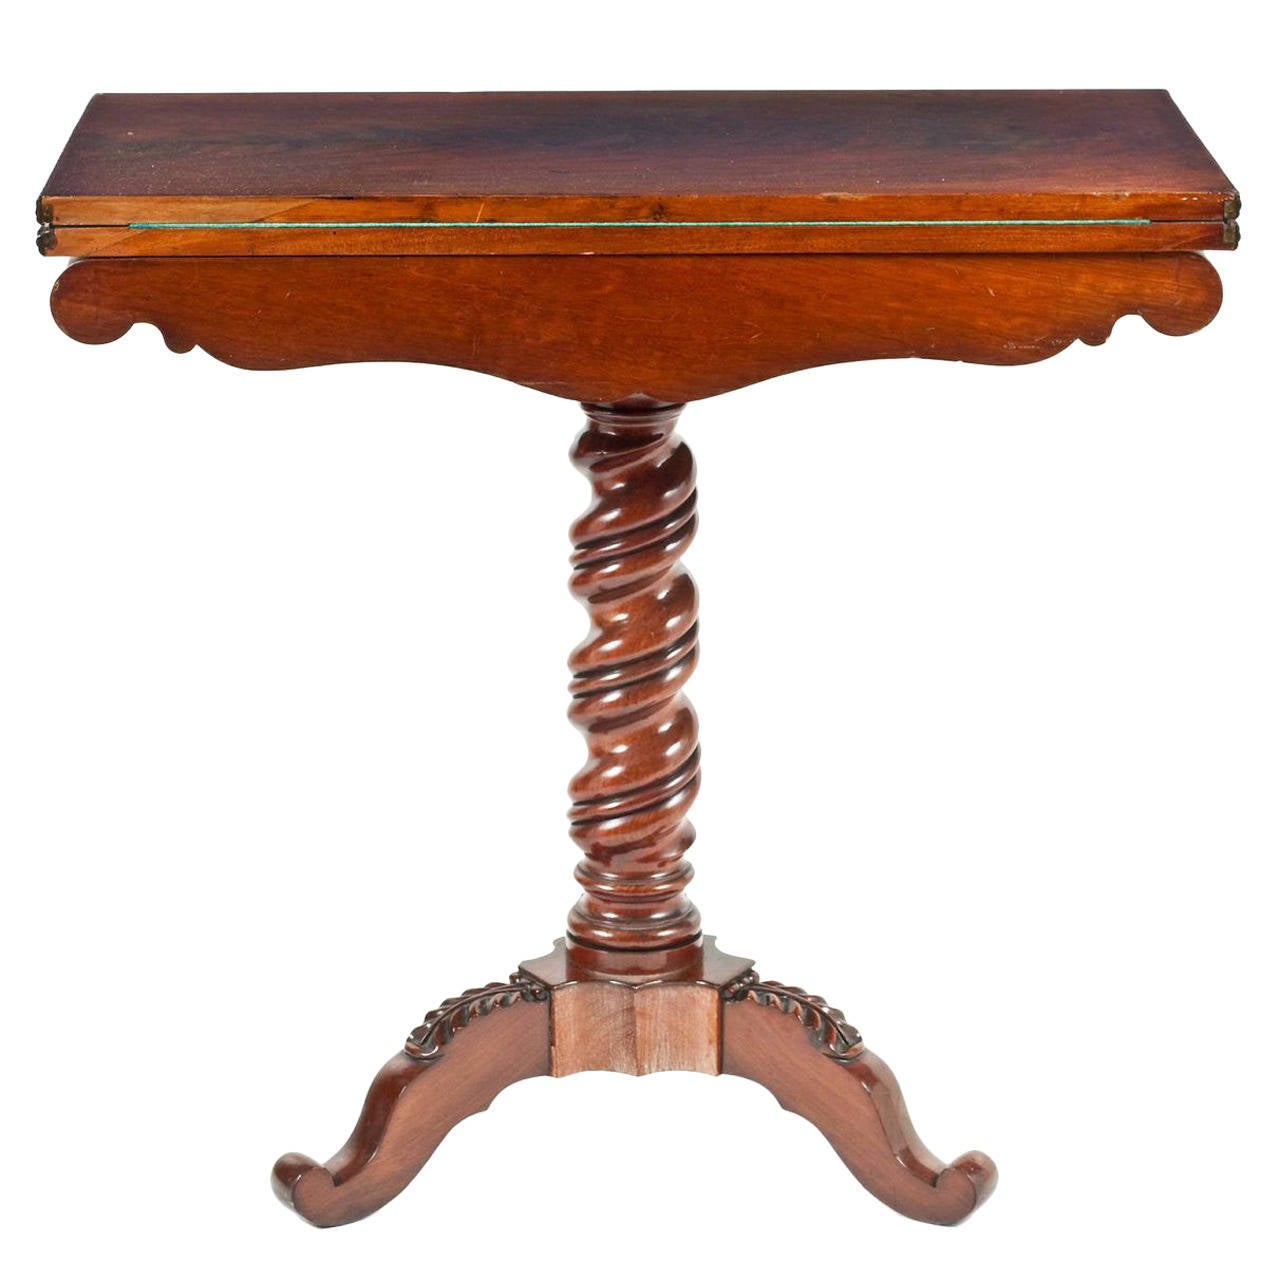 A late 19th Century French flame mahogany card table and family photo of.
The single flame moulded top, unfolding to a card playing table, having a decorative book-matched veneered frieze, on a well turned support column, resting on three outswept